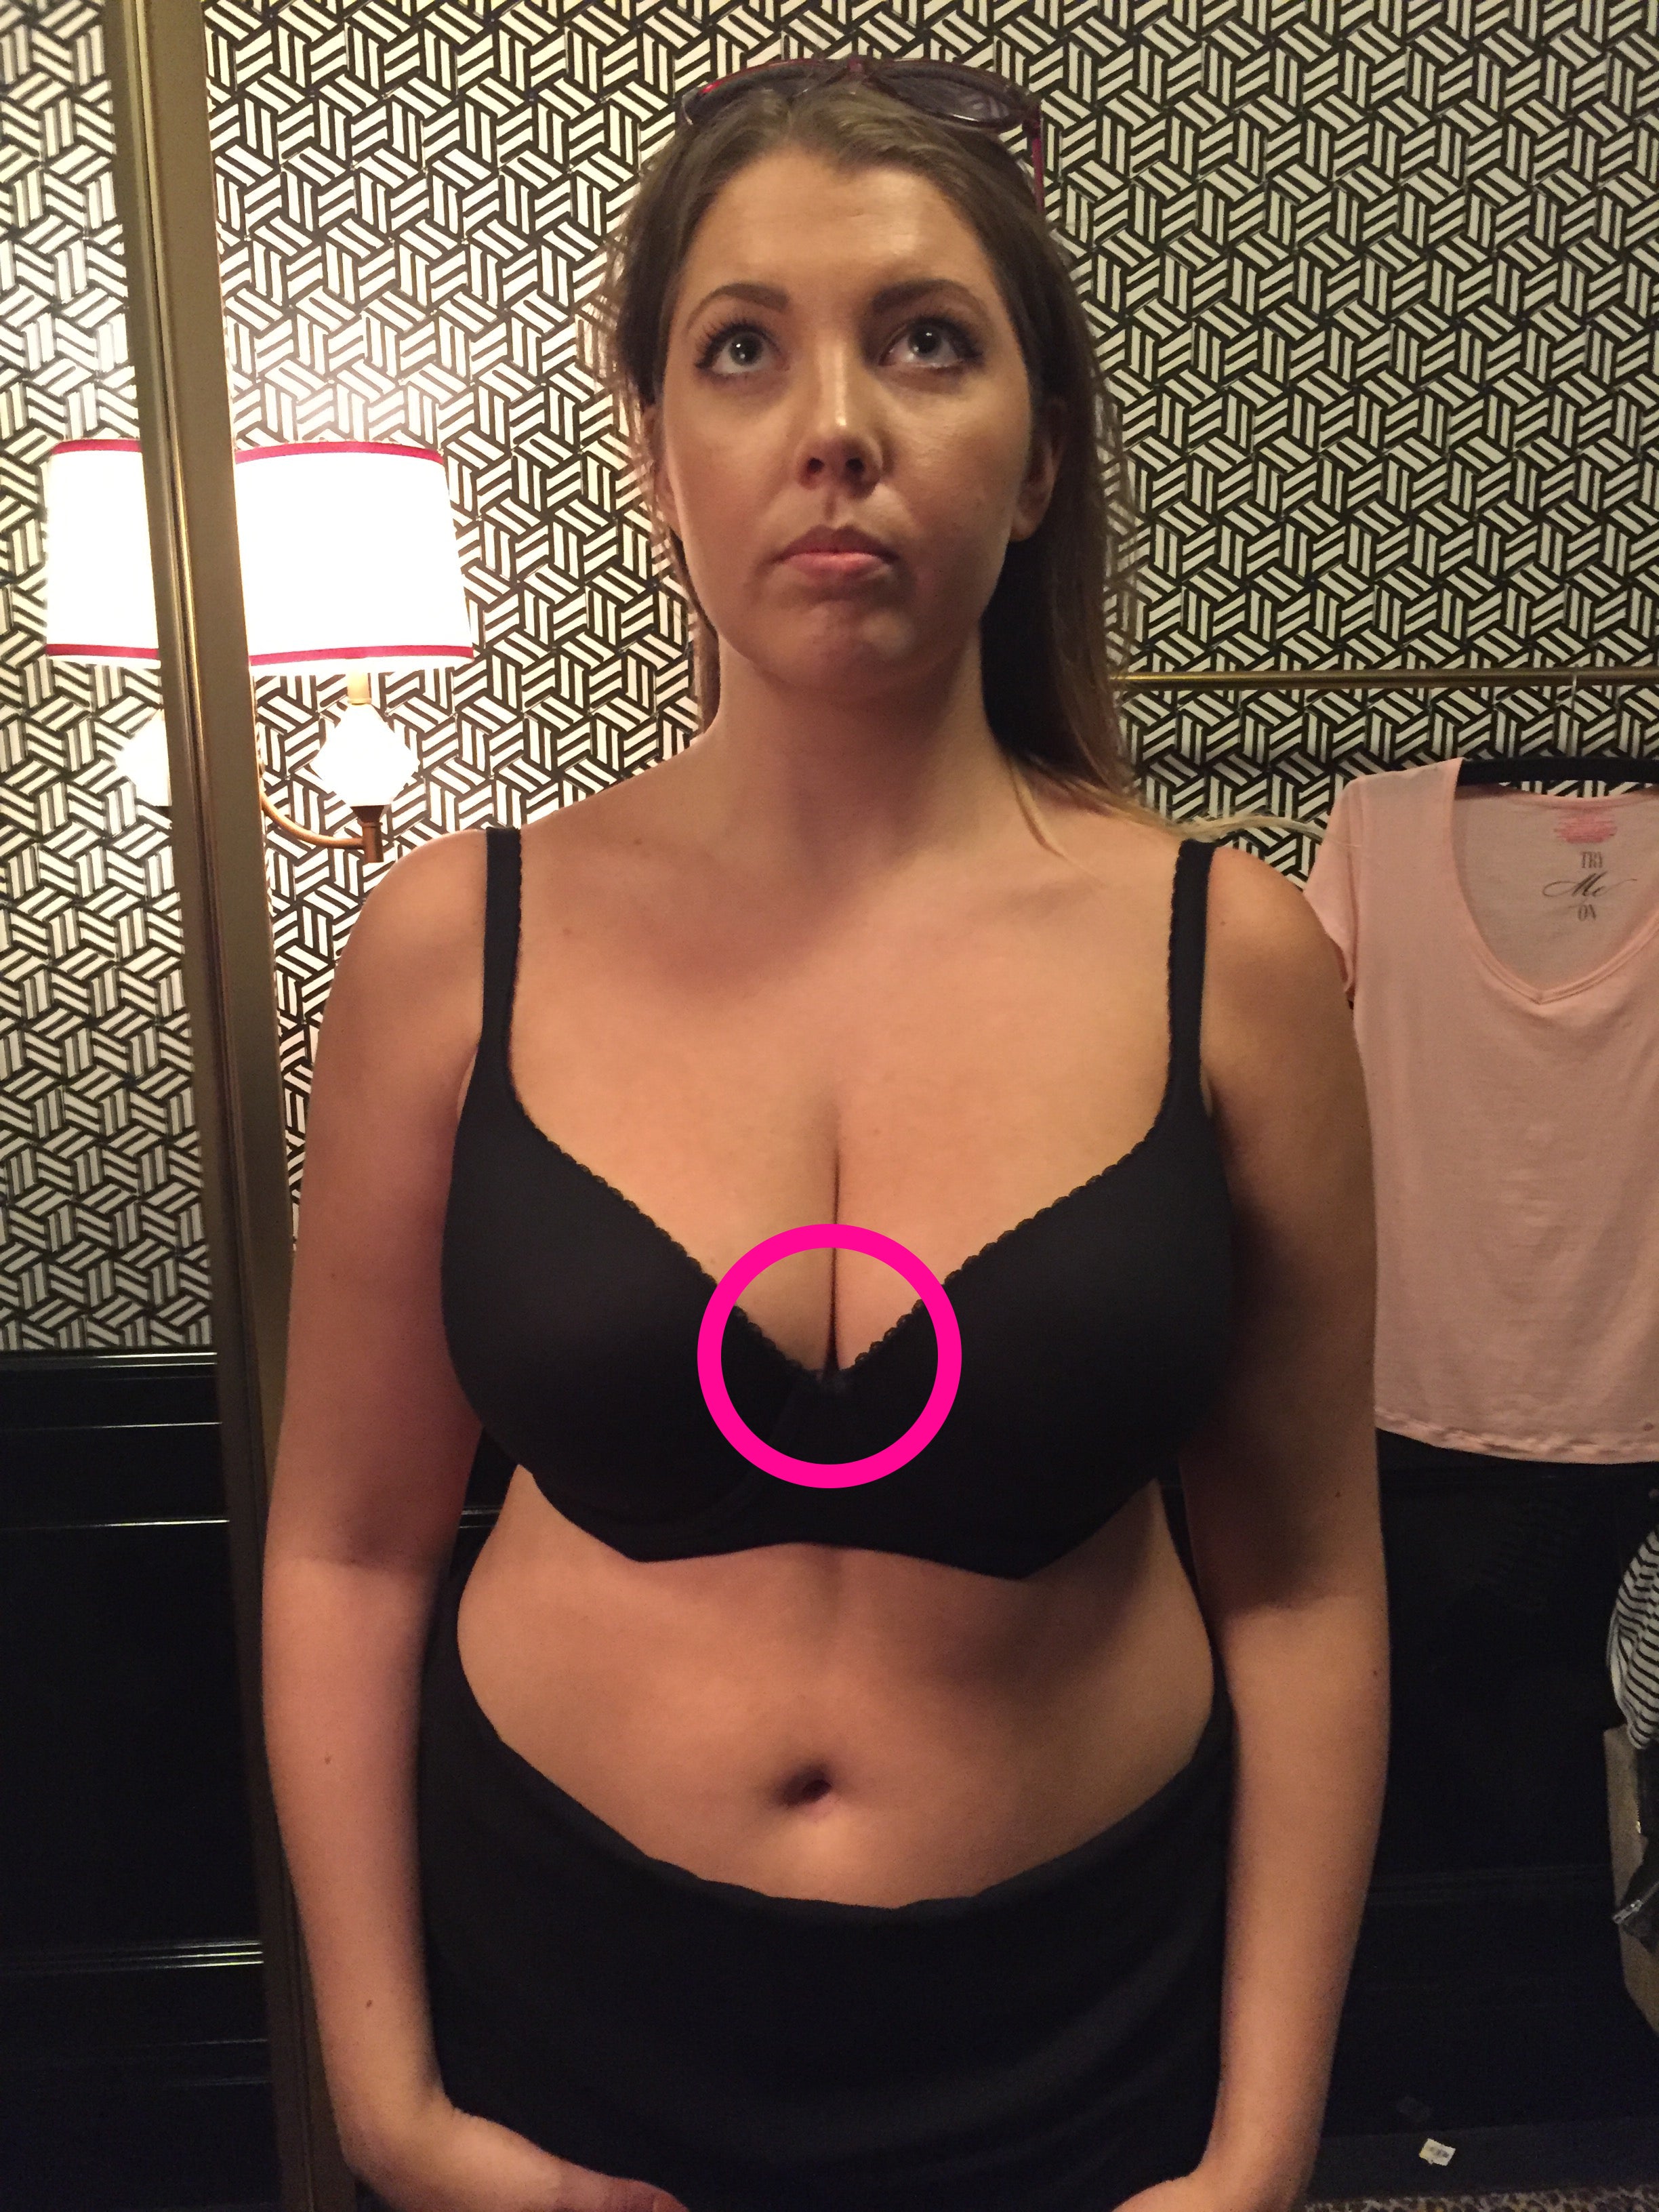 Lingerie Giant shows us exactly how NOT to do a bra fitting